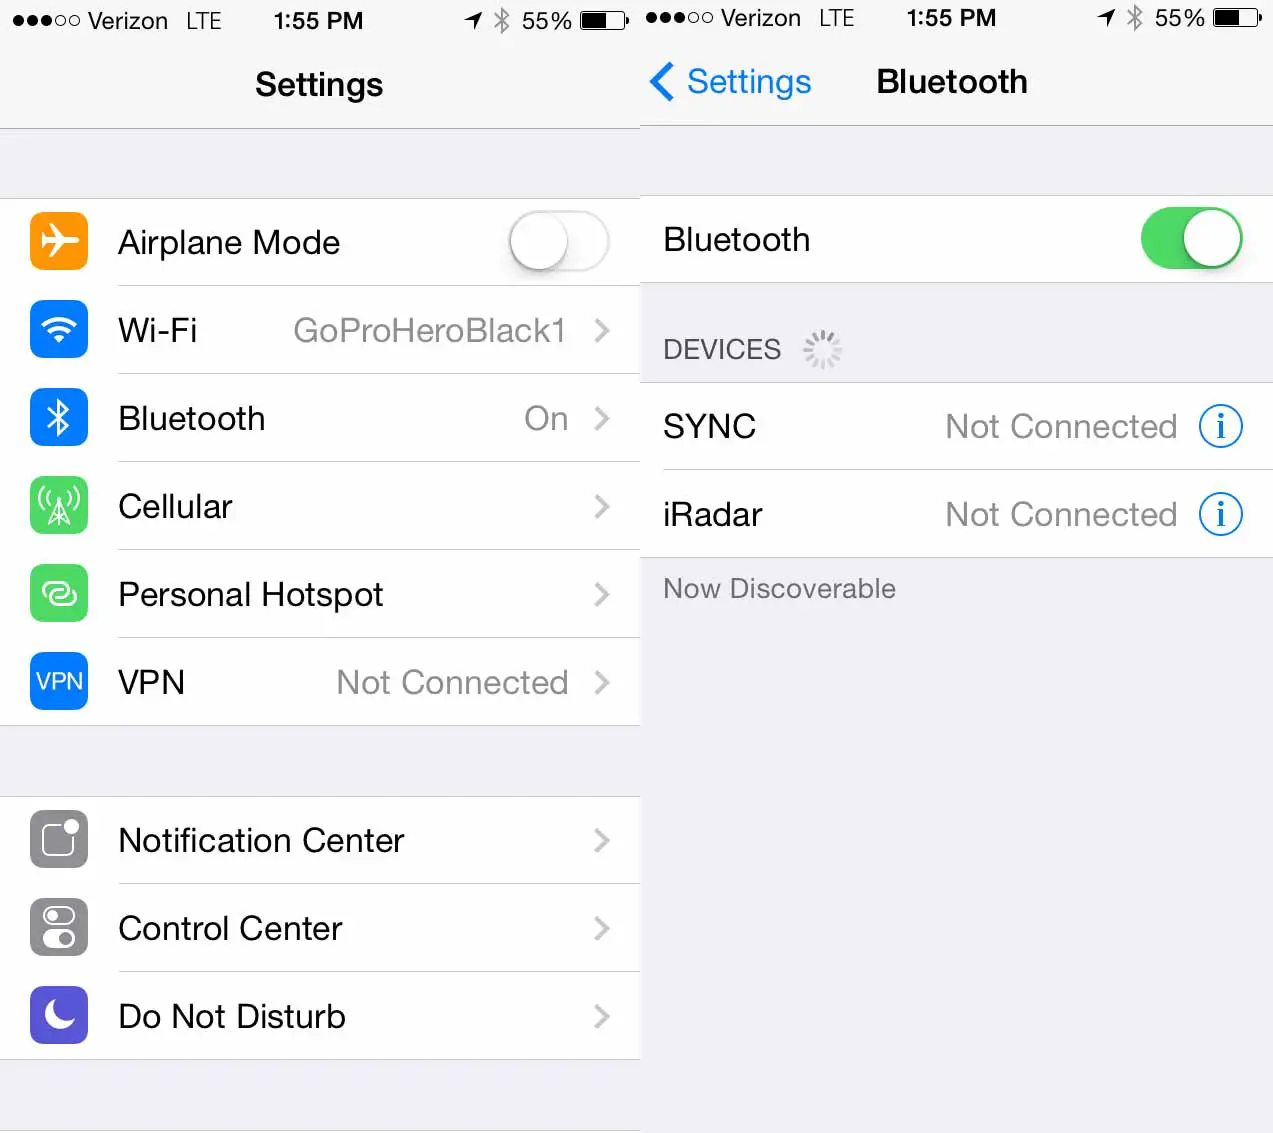 Toggle Off Bluetooth to avoid interference with WiFi connection